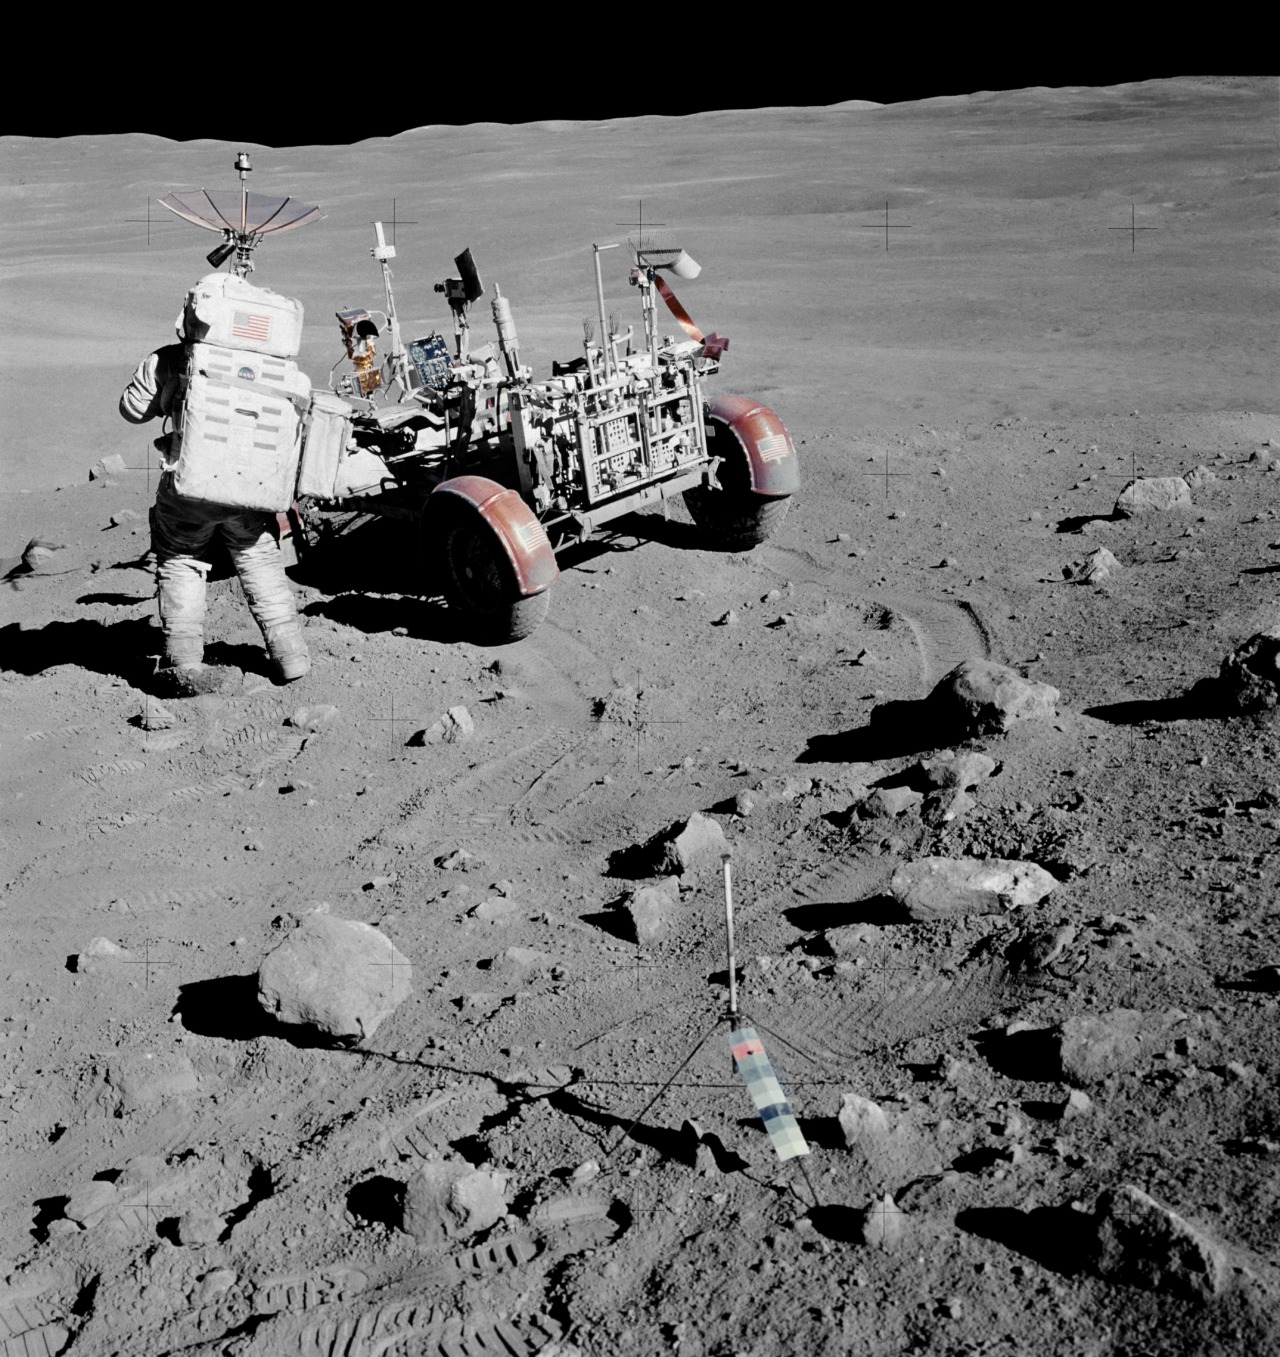 humanoidhistory:
“Apollo 16 astronaut Charlie Duke with the lunar rover on the Moon, April 22, 1972.
”